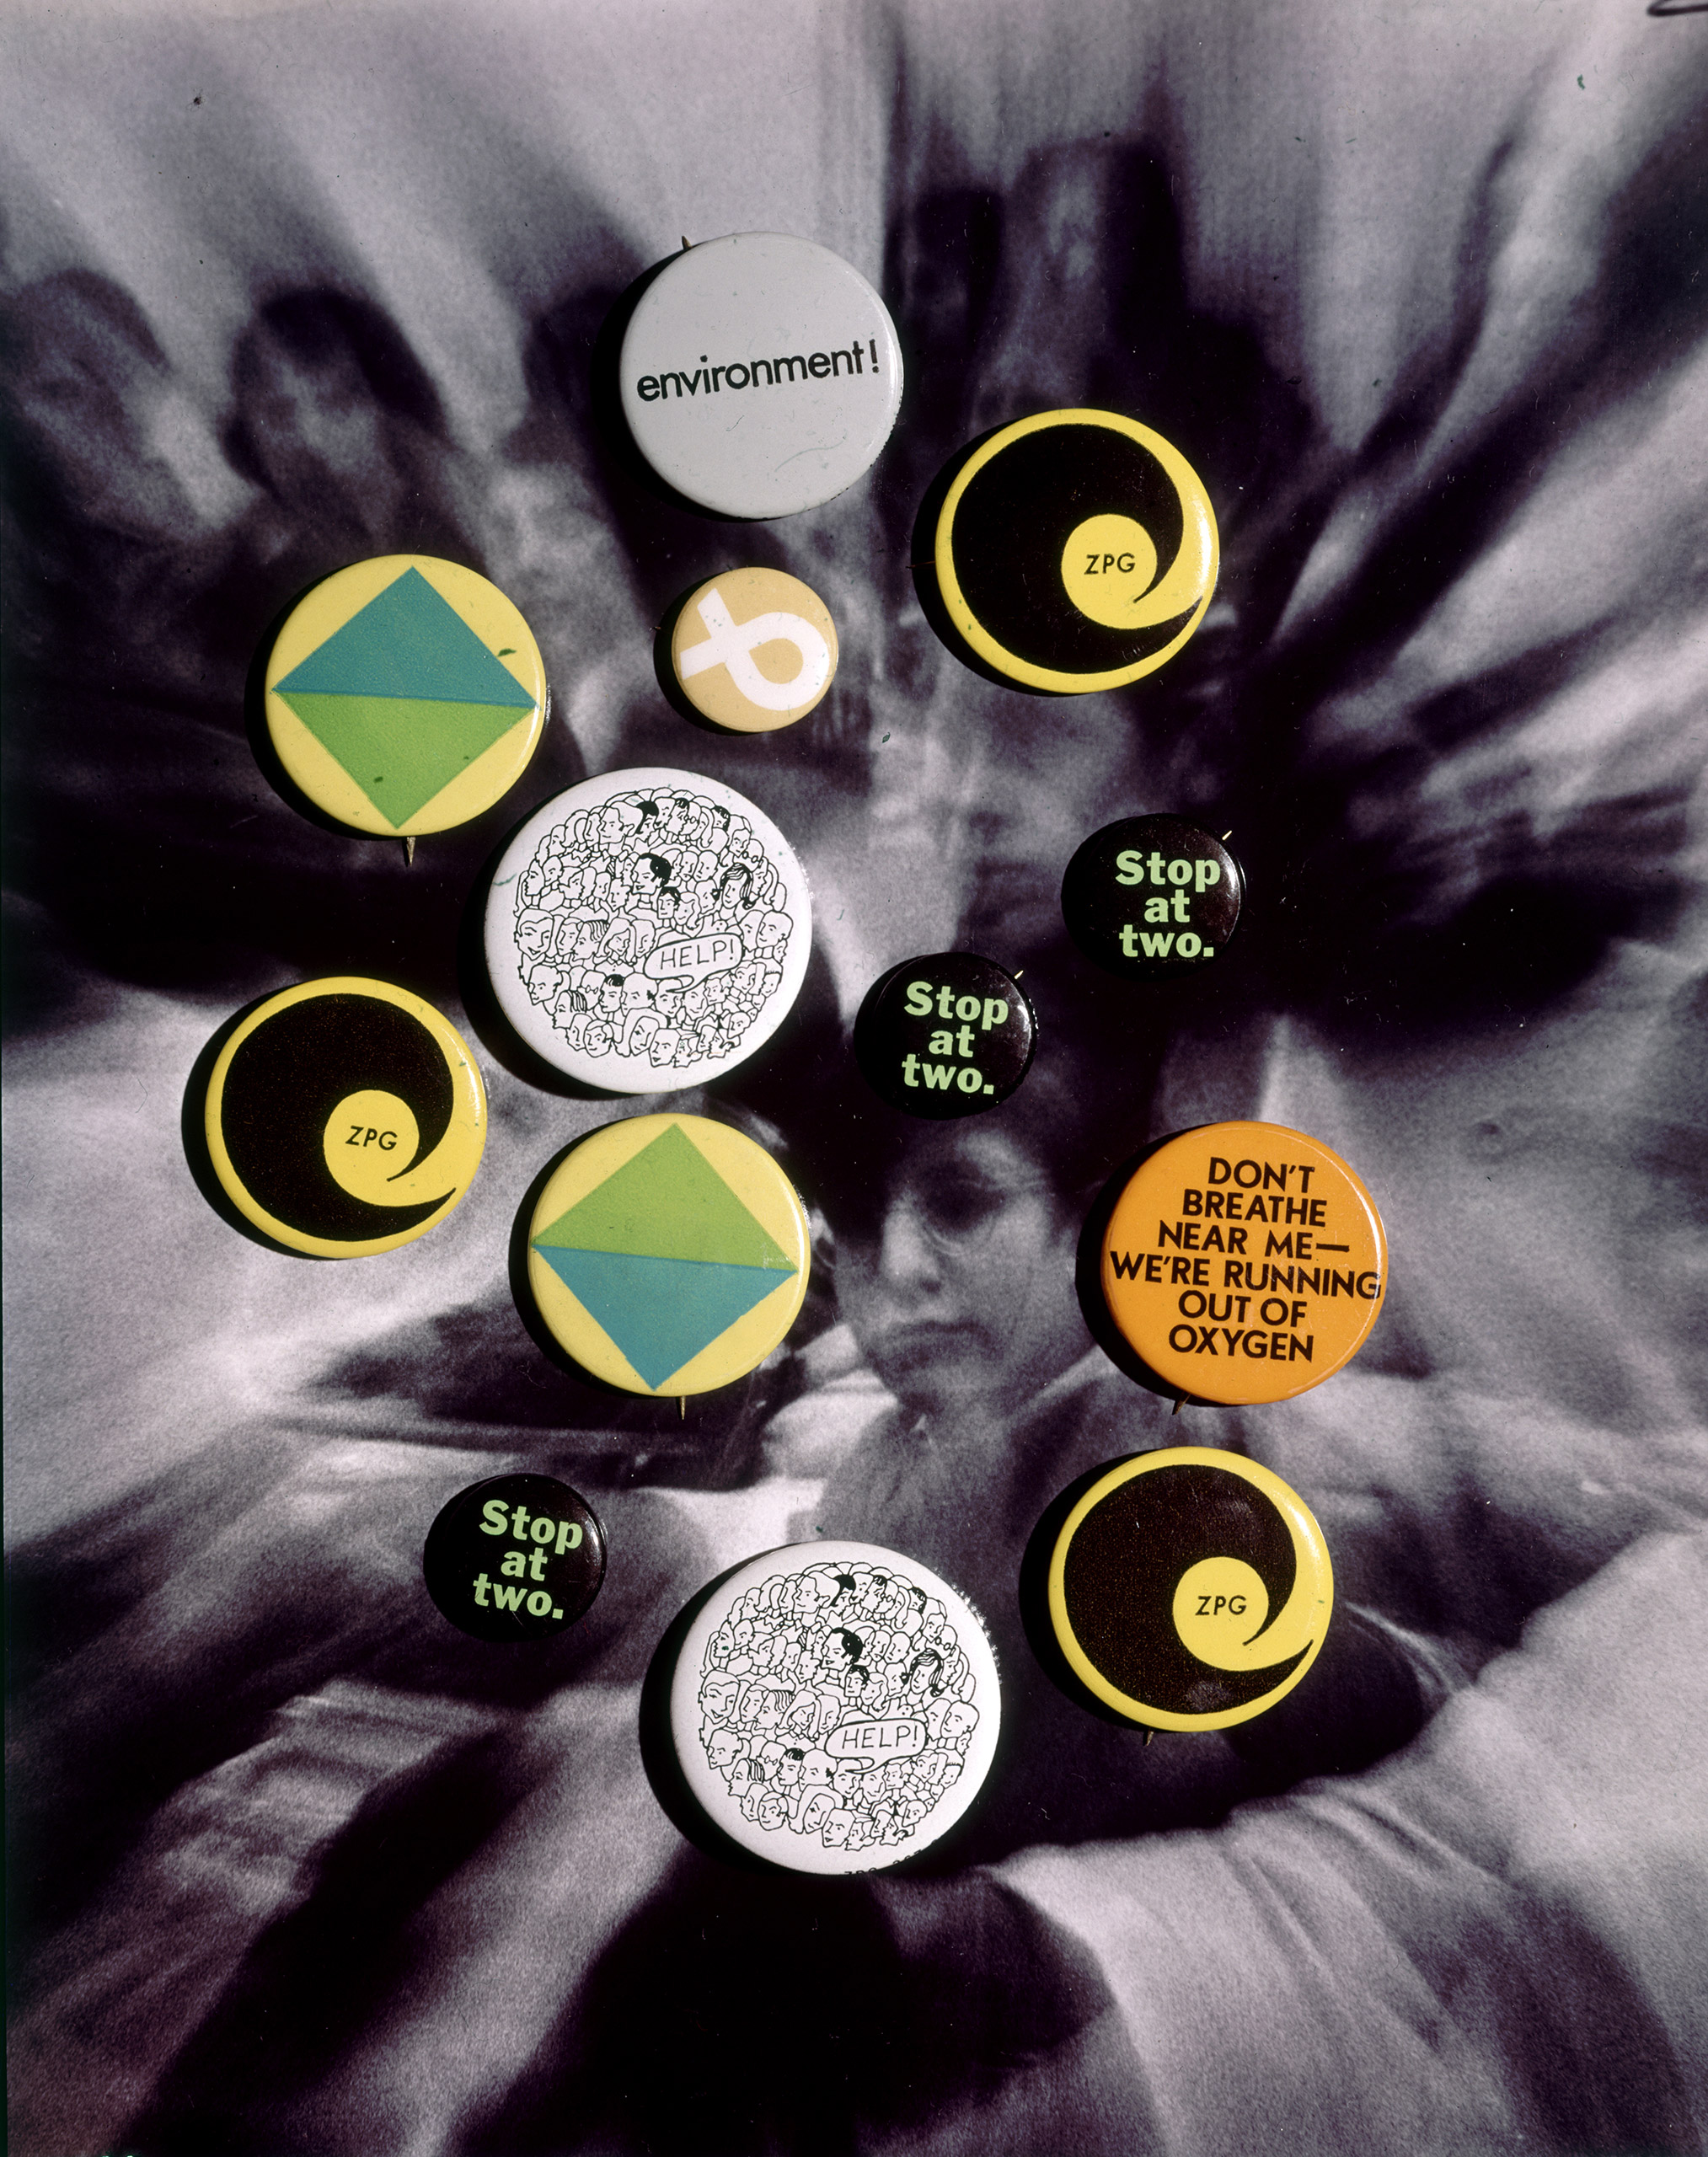 Ecology and population control buttons from the Zero Population Growth movement at Ithaca College NY 1970. (Art Rickerby—The LIFE Picture Collection/Getty Images)